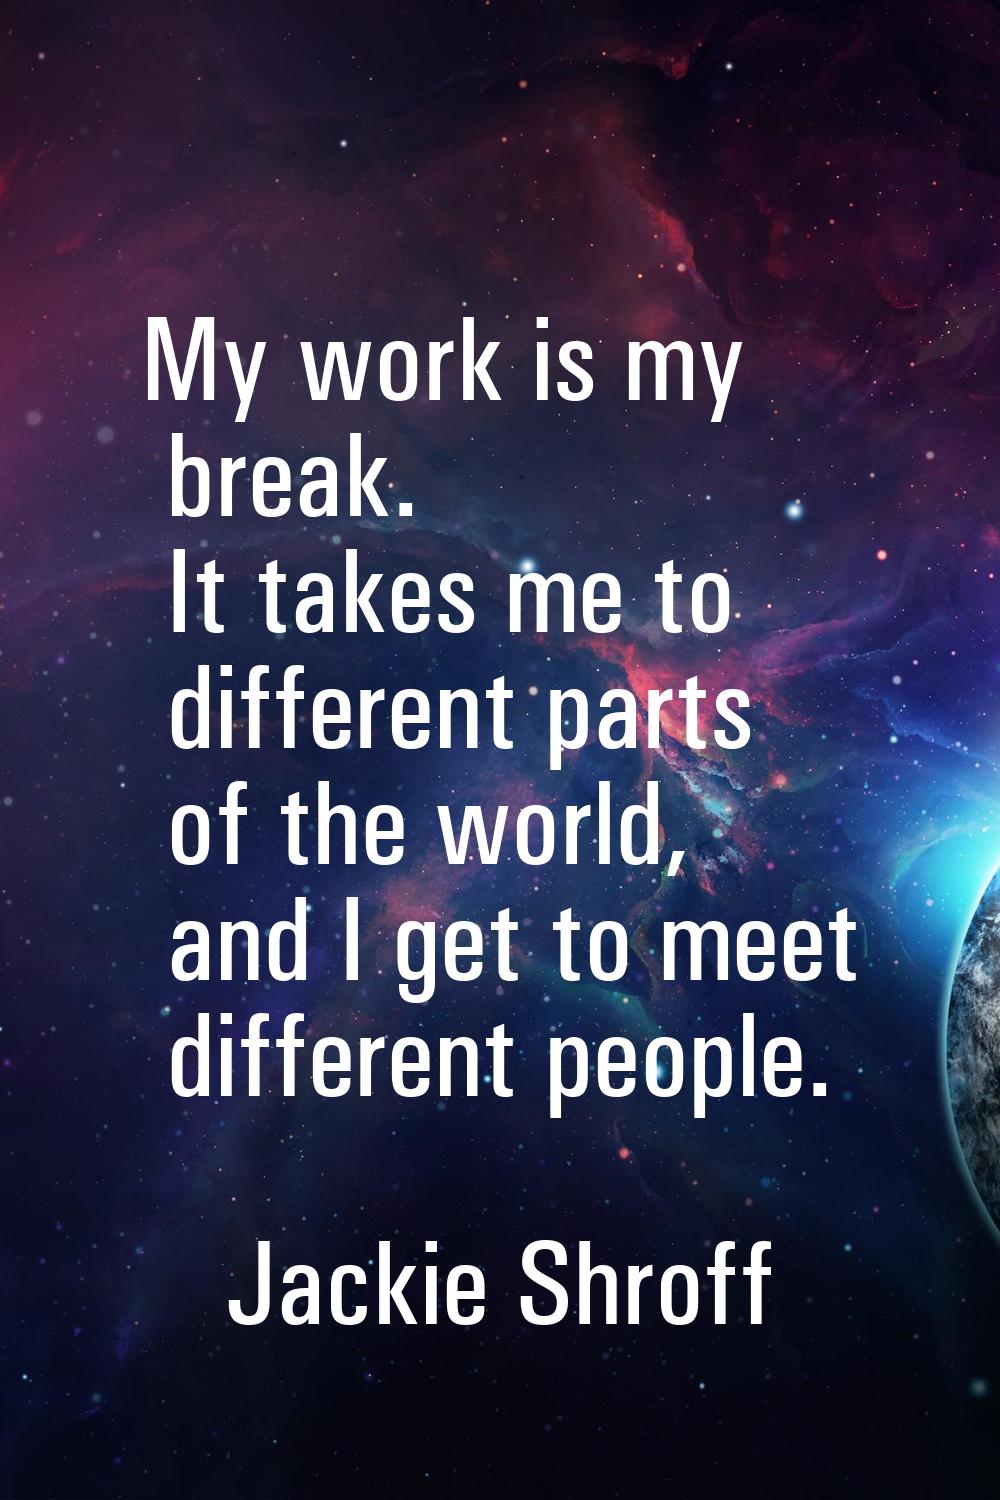 My work is my break. It takes me to different parts of the world, and I get to meet different peopl